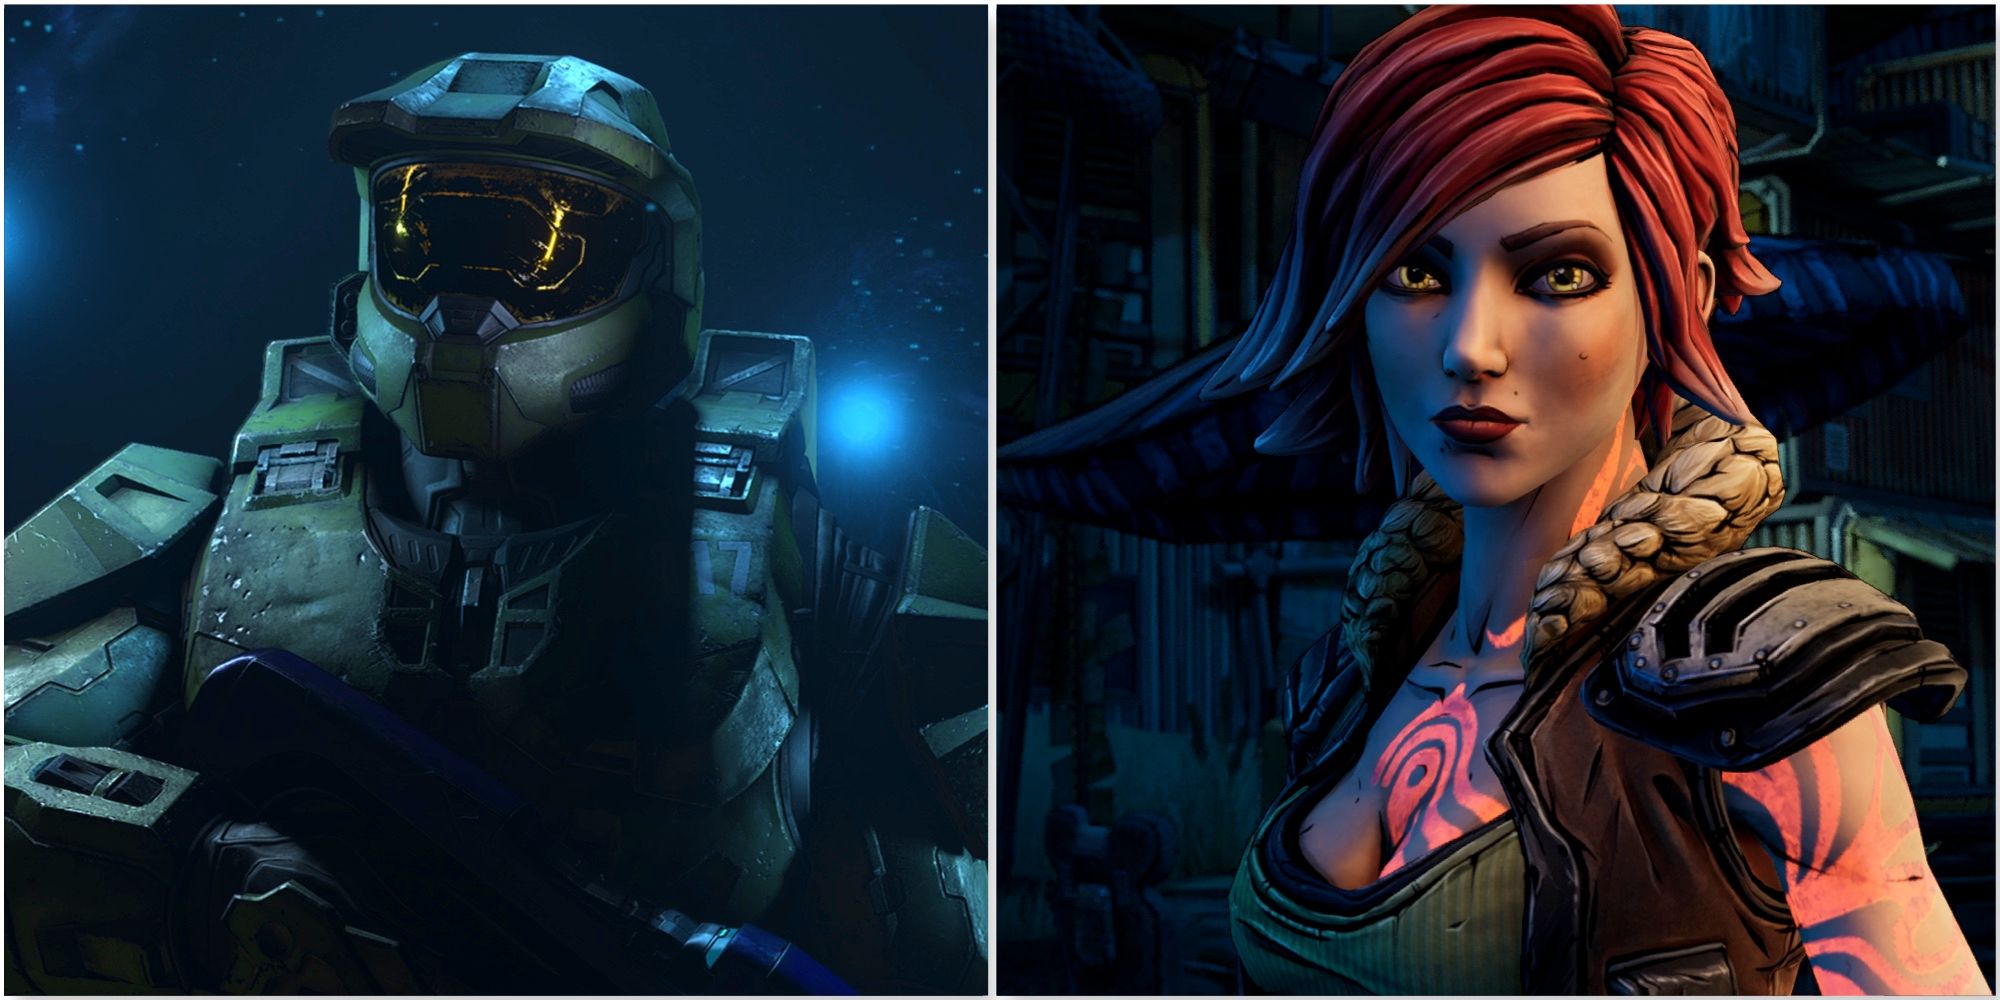 Master Chief in Halo Infinite and Lilith from Borderlands 3